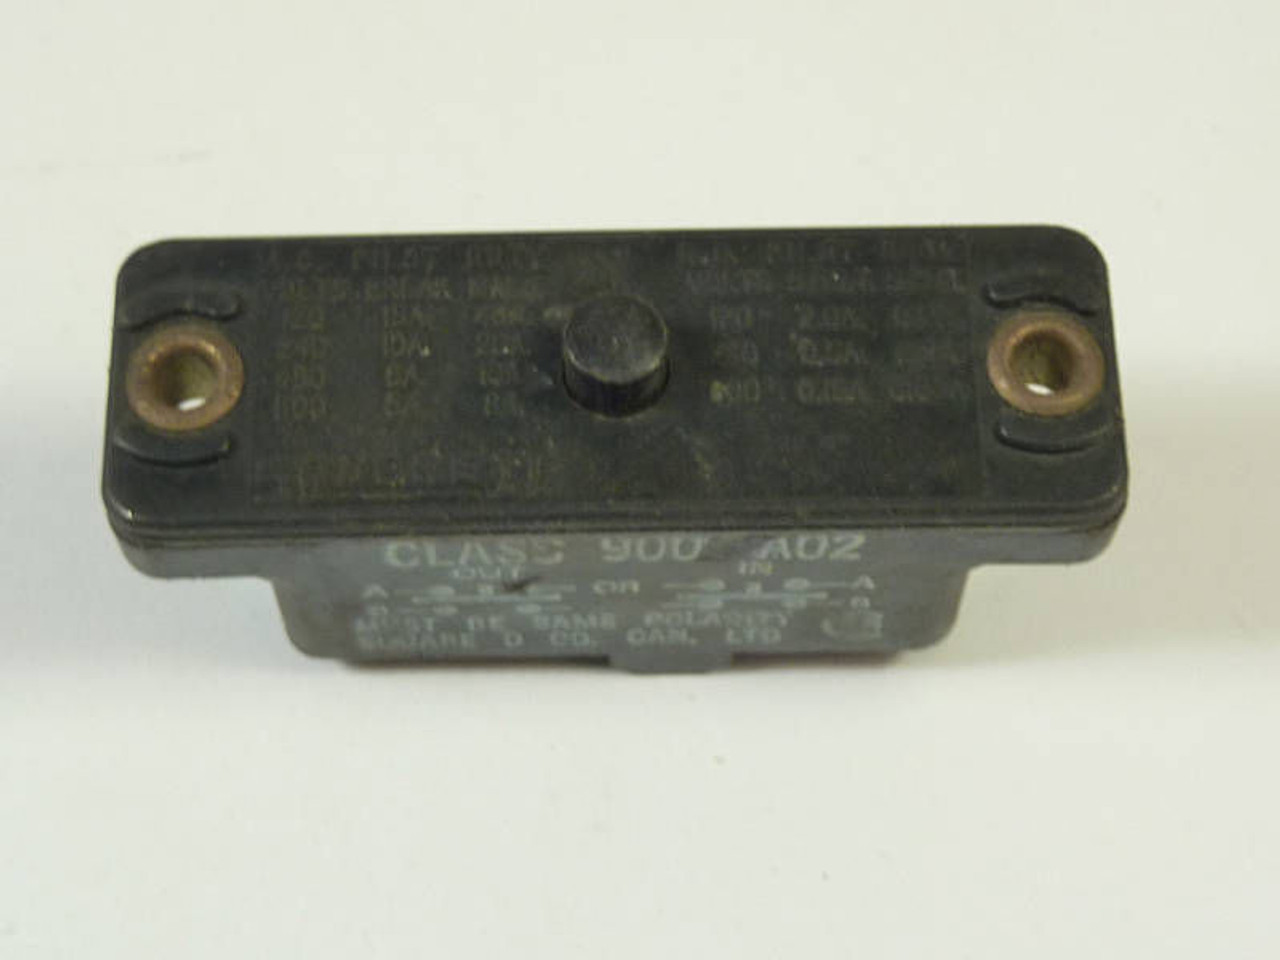 Square D Relay Connector 900 A02 USED